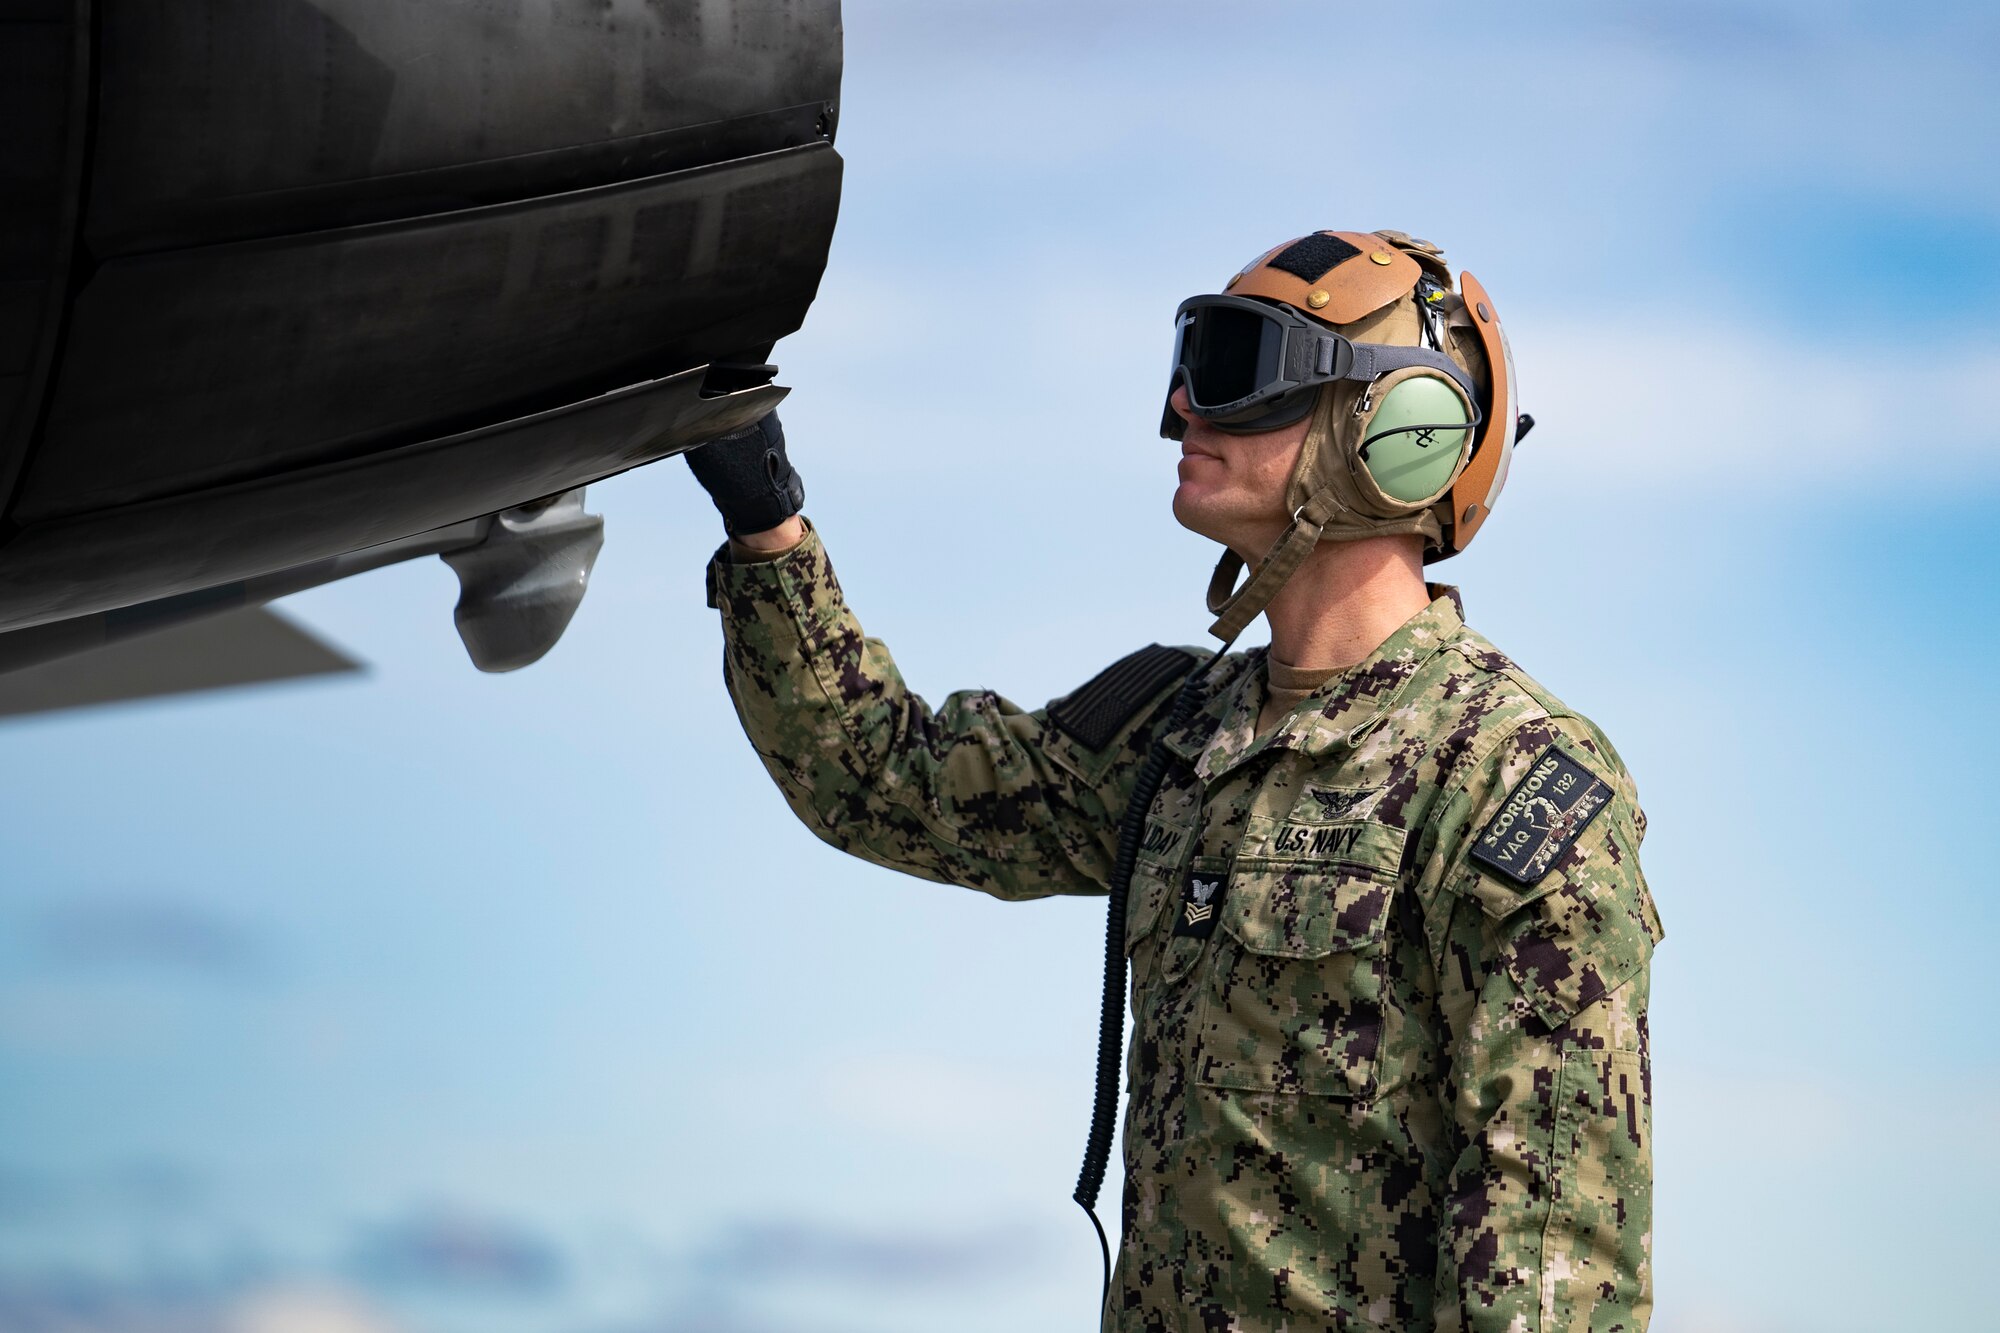 U.S. Navy Aviation Machinist's Mate 1st Class Corey Holliday, assigned to Electronic Attack Squadron (VAQ) 132, inspect an EA-18G “Growler” during Northern Edge 23-1 exercise at Joint Base Elmendorf-Richardson, Alaska, May 11, 2023